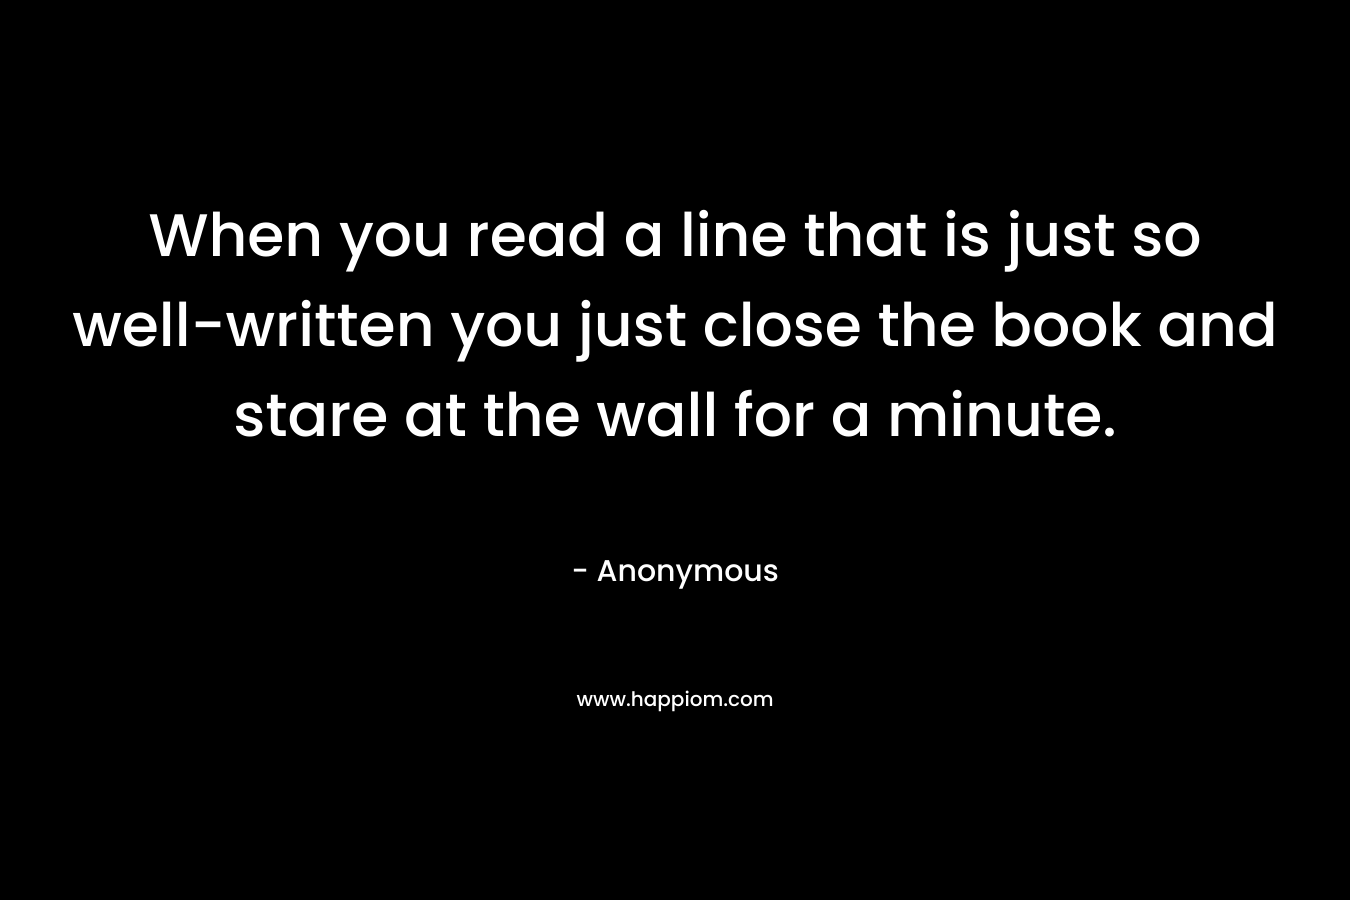 When you read a line that is just so well-written you just close the book and stare at the wall for a minute.